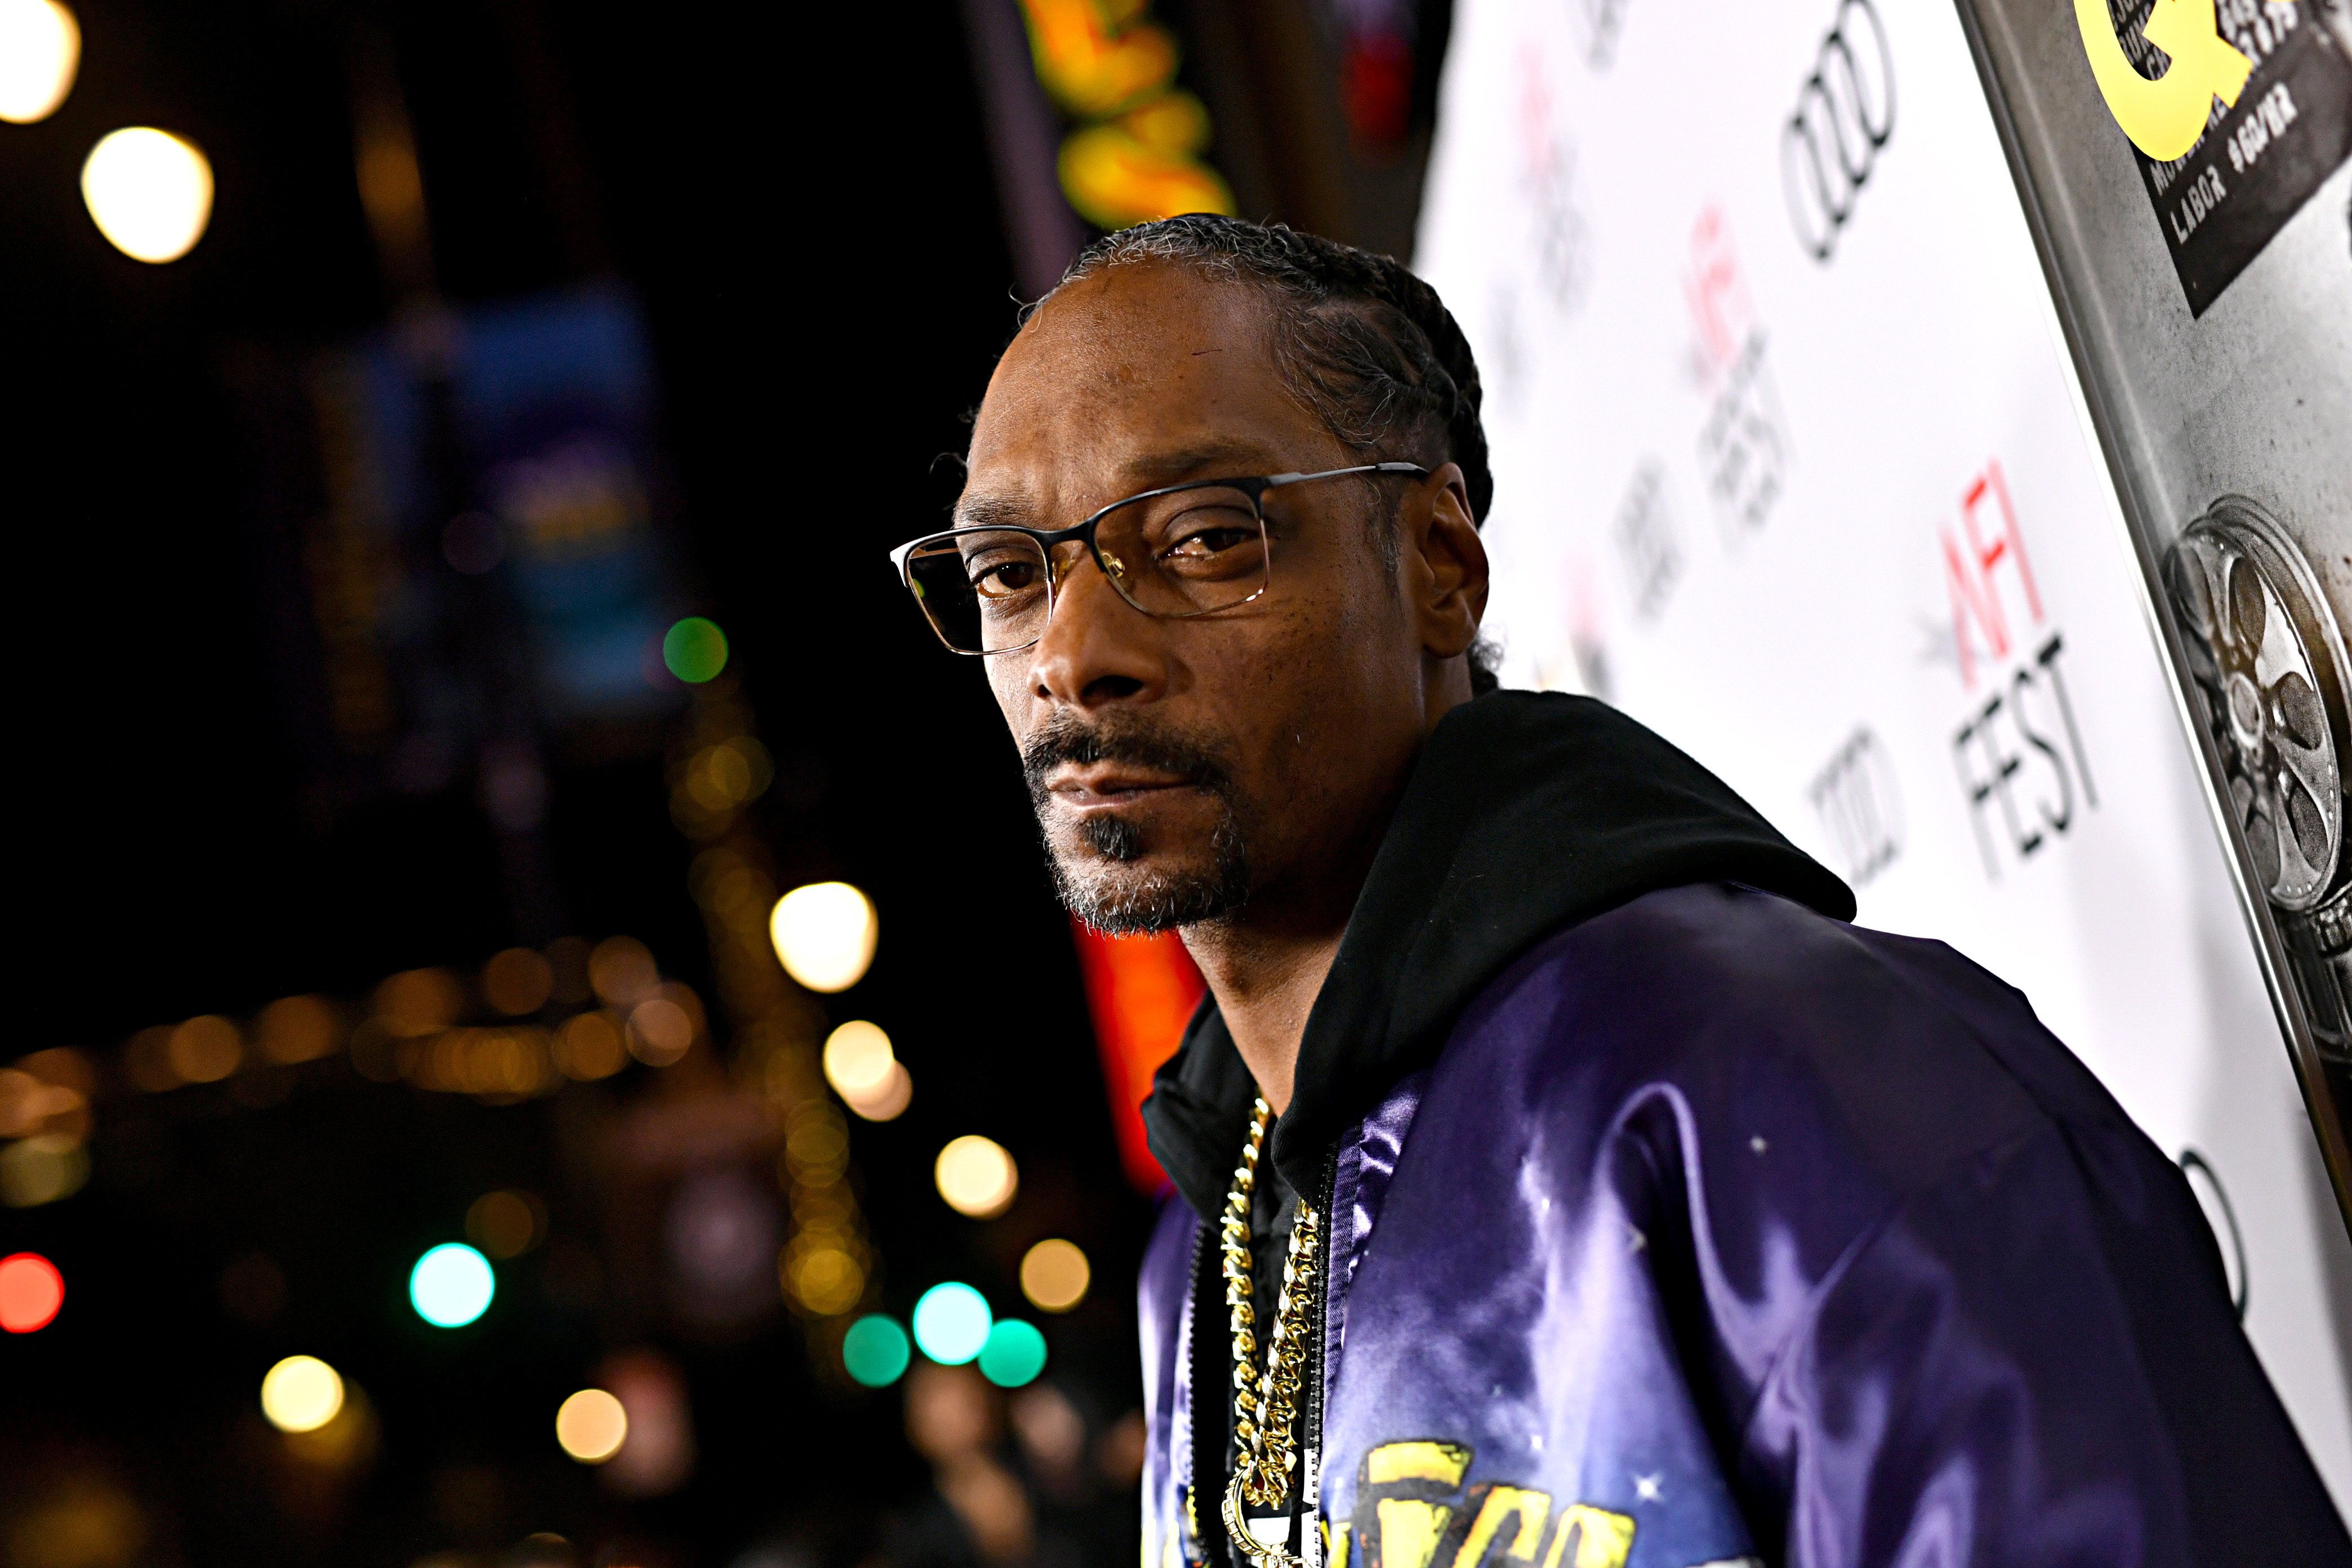 Snoop Dogg at the "Queen & Slim" premiere at the TCL Chinese Theatre on November 14, 2019 in Hollywood, California. | Source: Getty Images